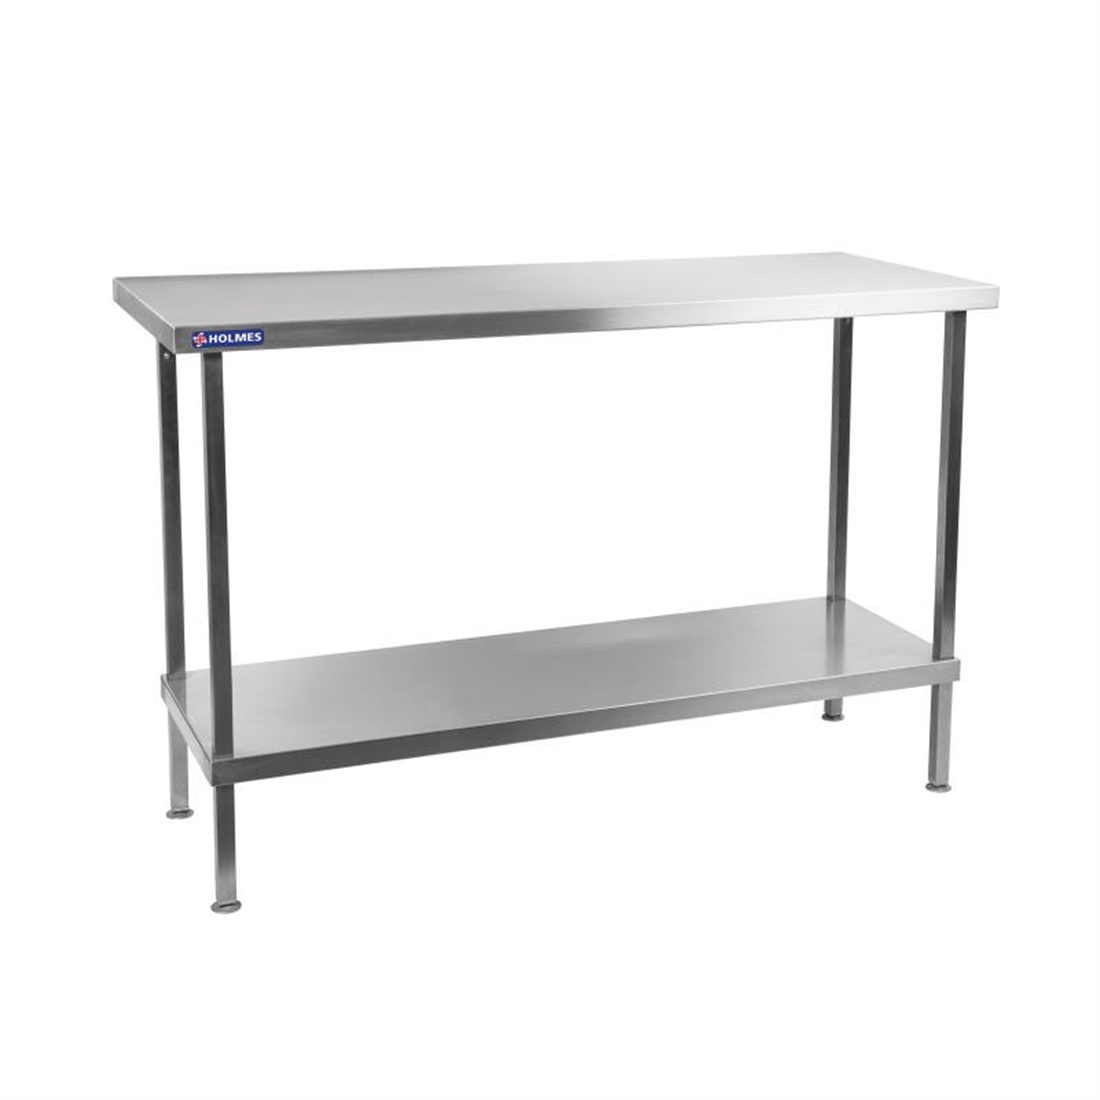 Holmes Self Assembly Stainless Steel Centre Table 900mm